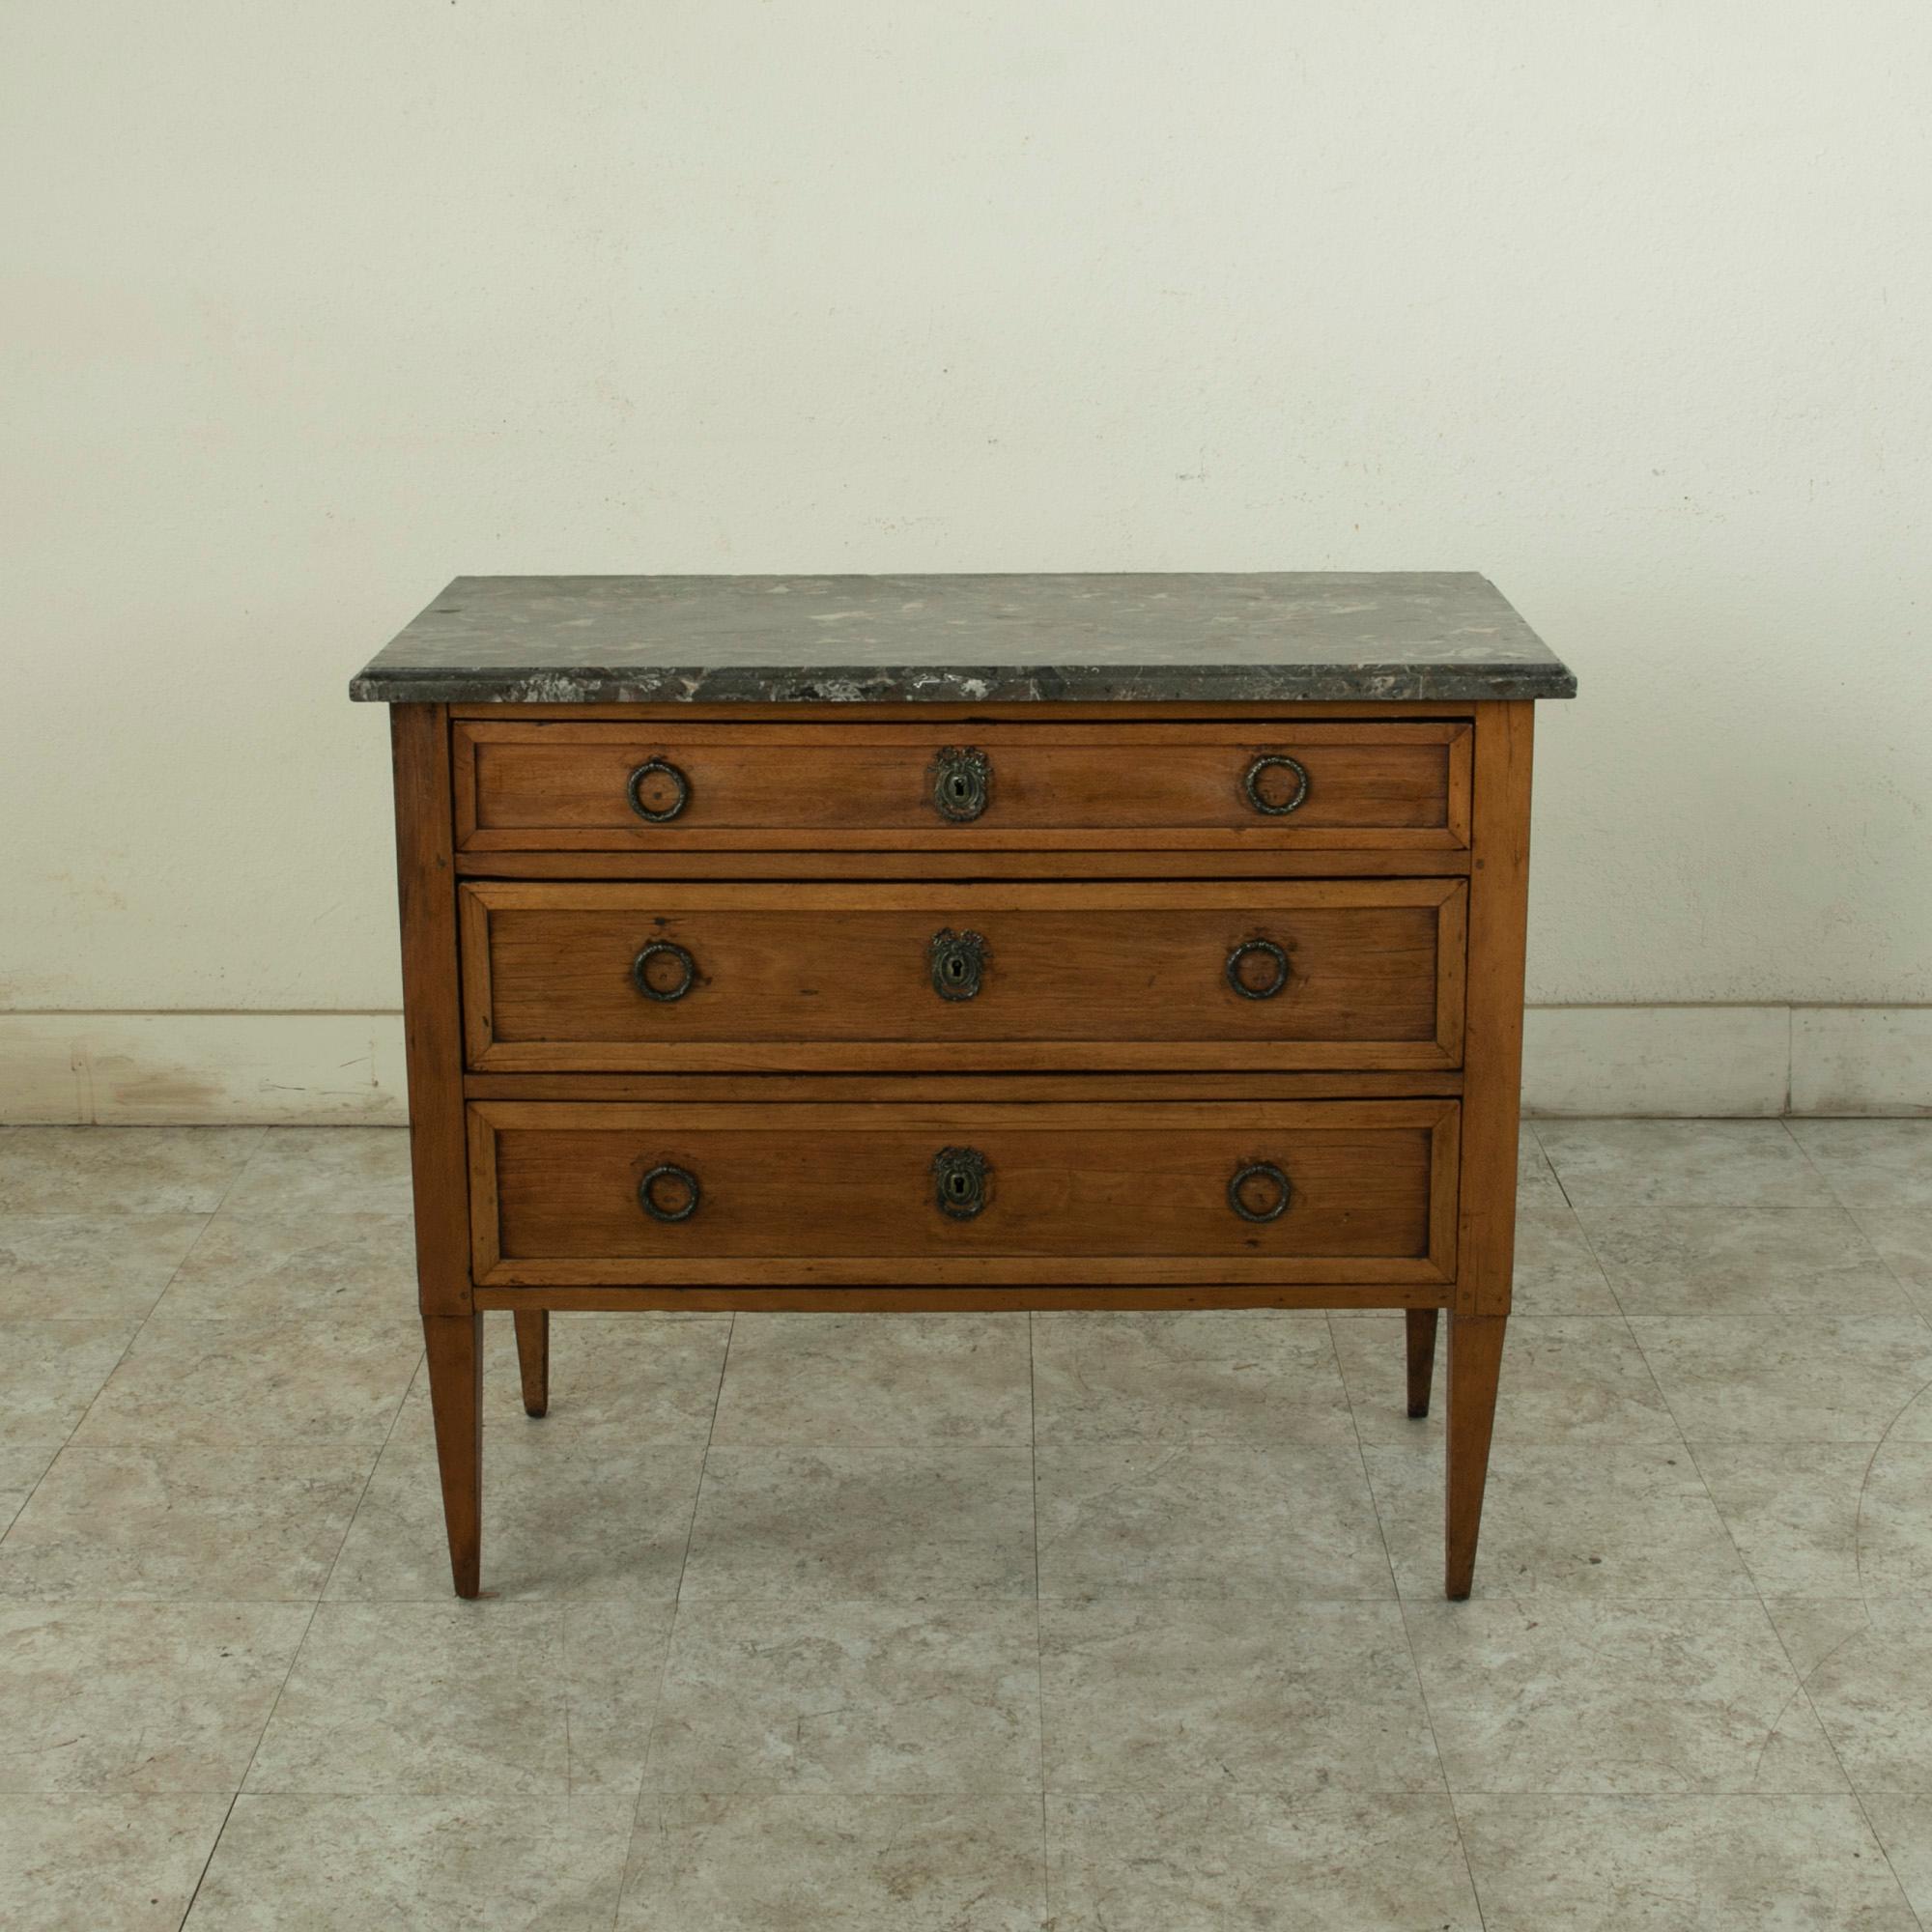 This small scale French Louis XVI style commode or chest from the late 19th century is constructed of solid fruitwood and features a beveled marble top. The cabinet has solid paneled sides and drawer fronts. Three drawers of dovetail construction